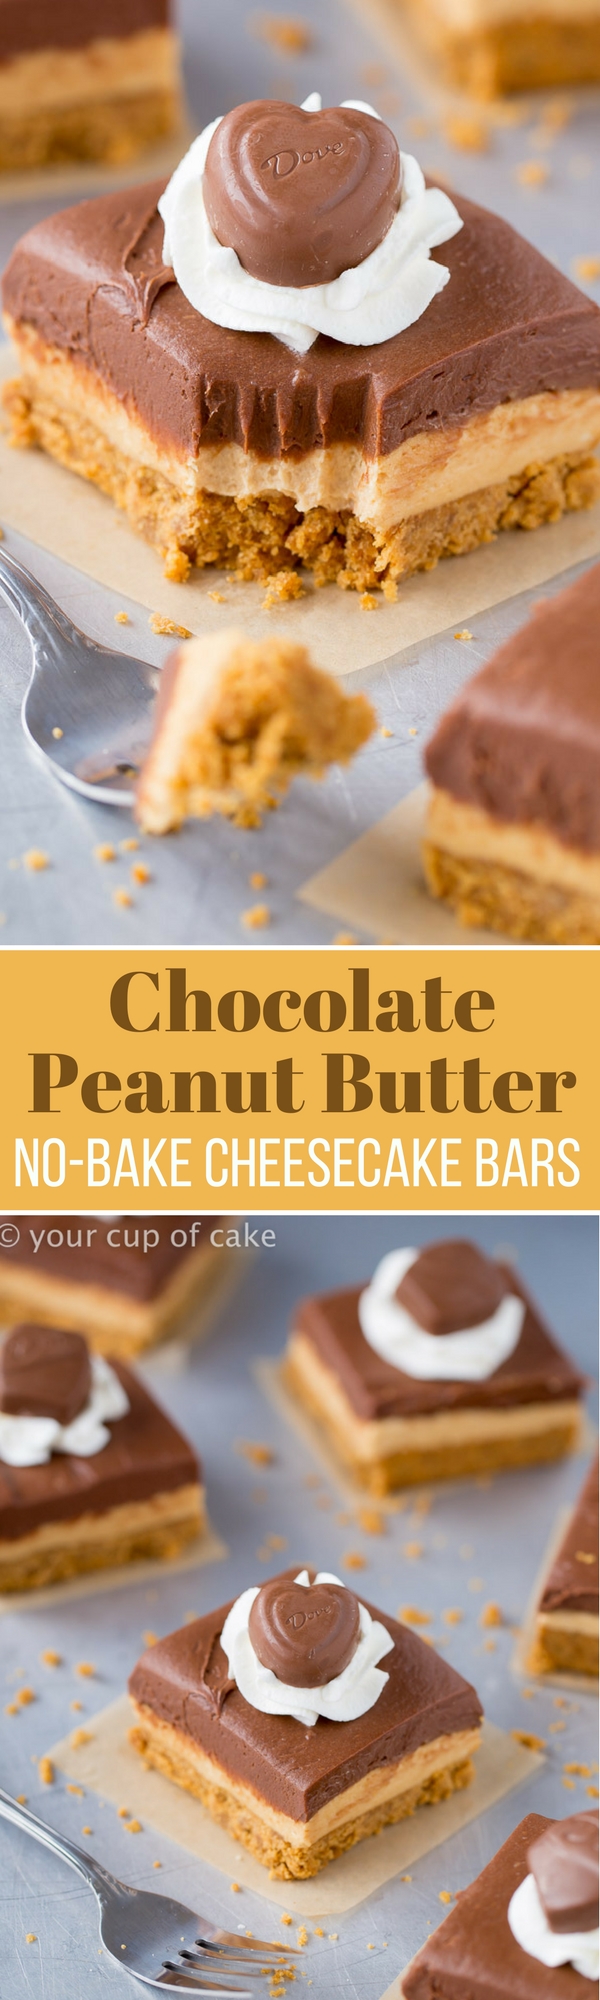 Chocolate Peanut Butter No-Bake Cheesecake Bars, these are SO GOOD! Love this easy recipe!